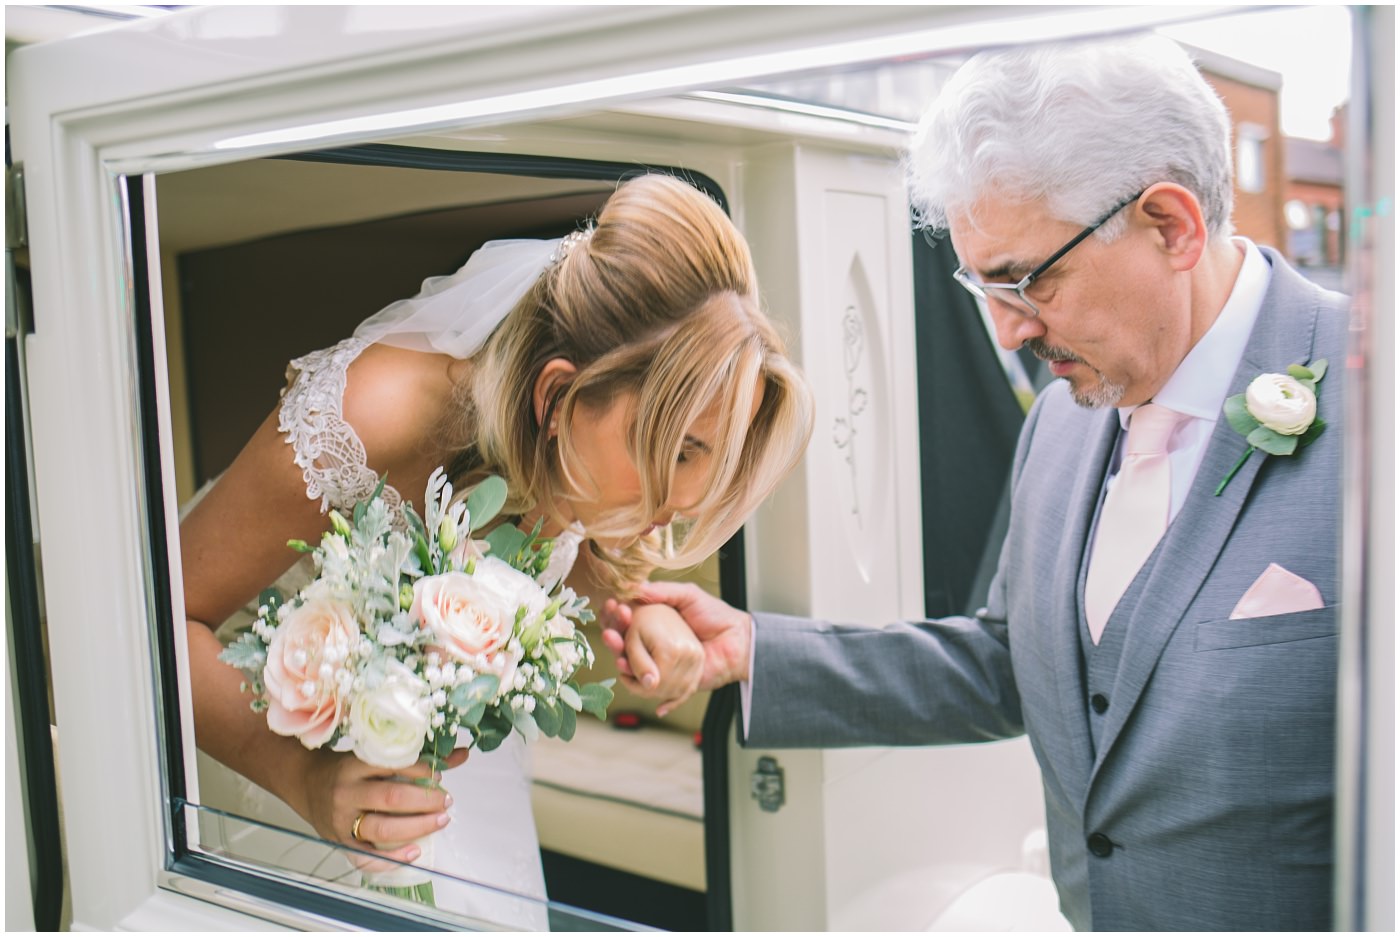 brides father helps her out of the wedding car